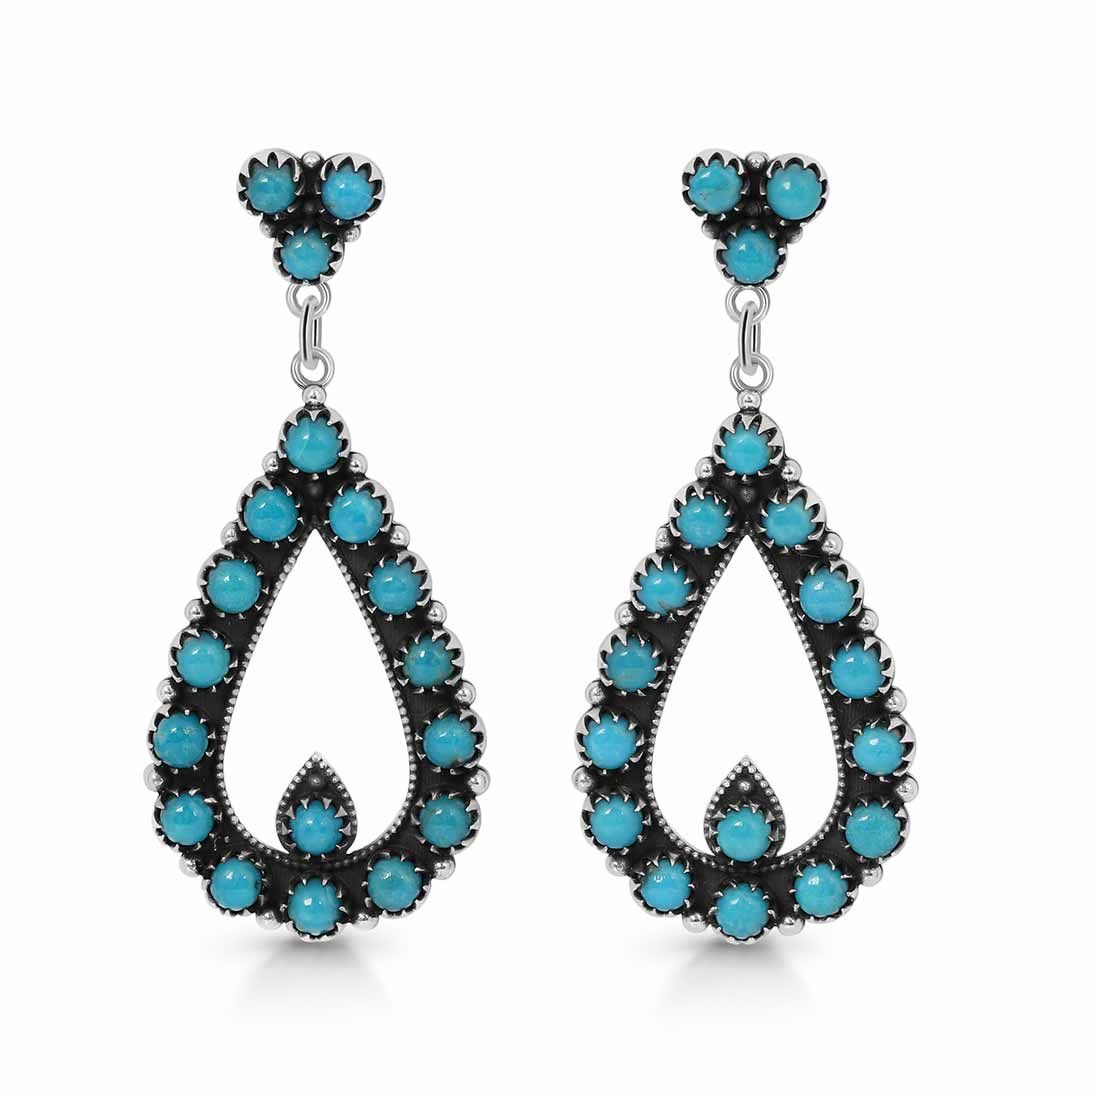 Nurture your life with these Turquoise Jewelry